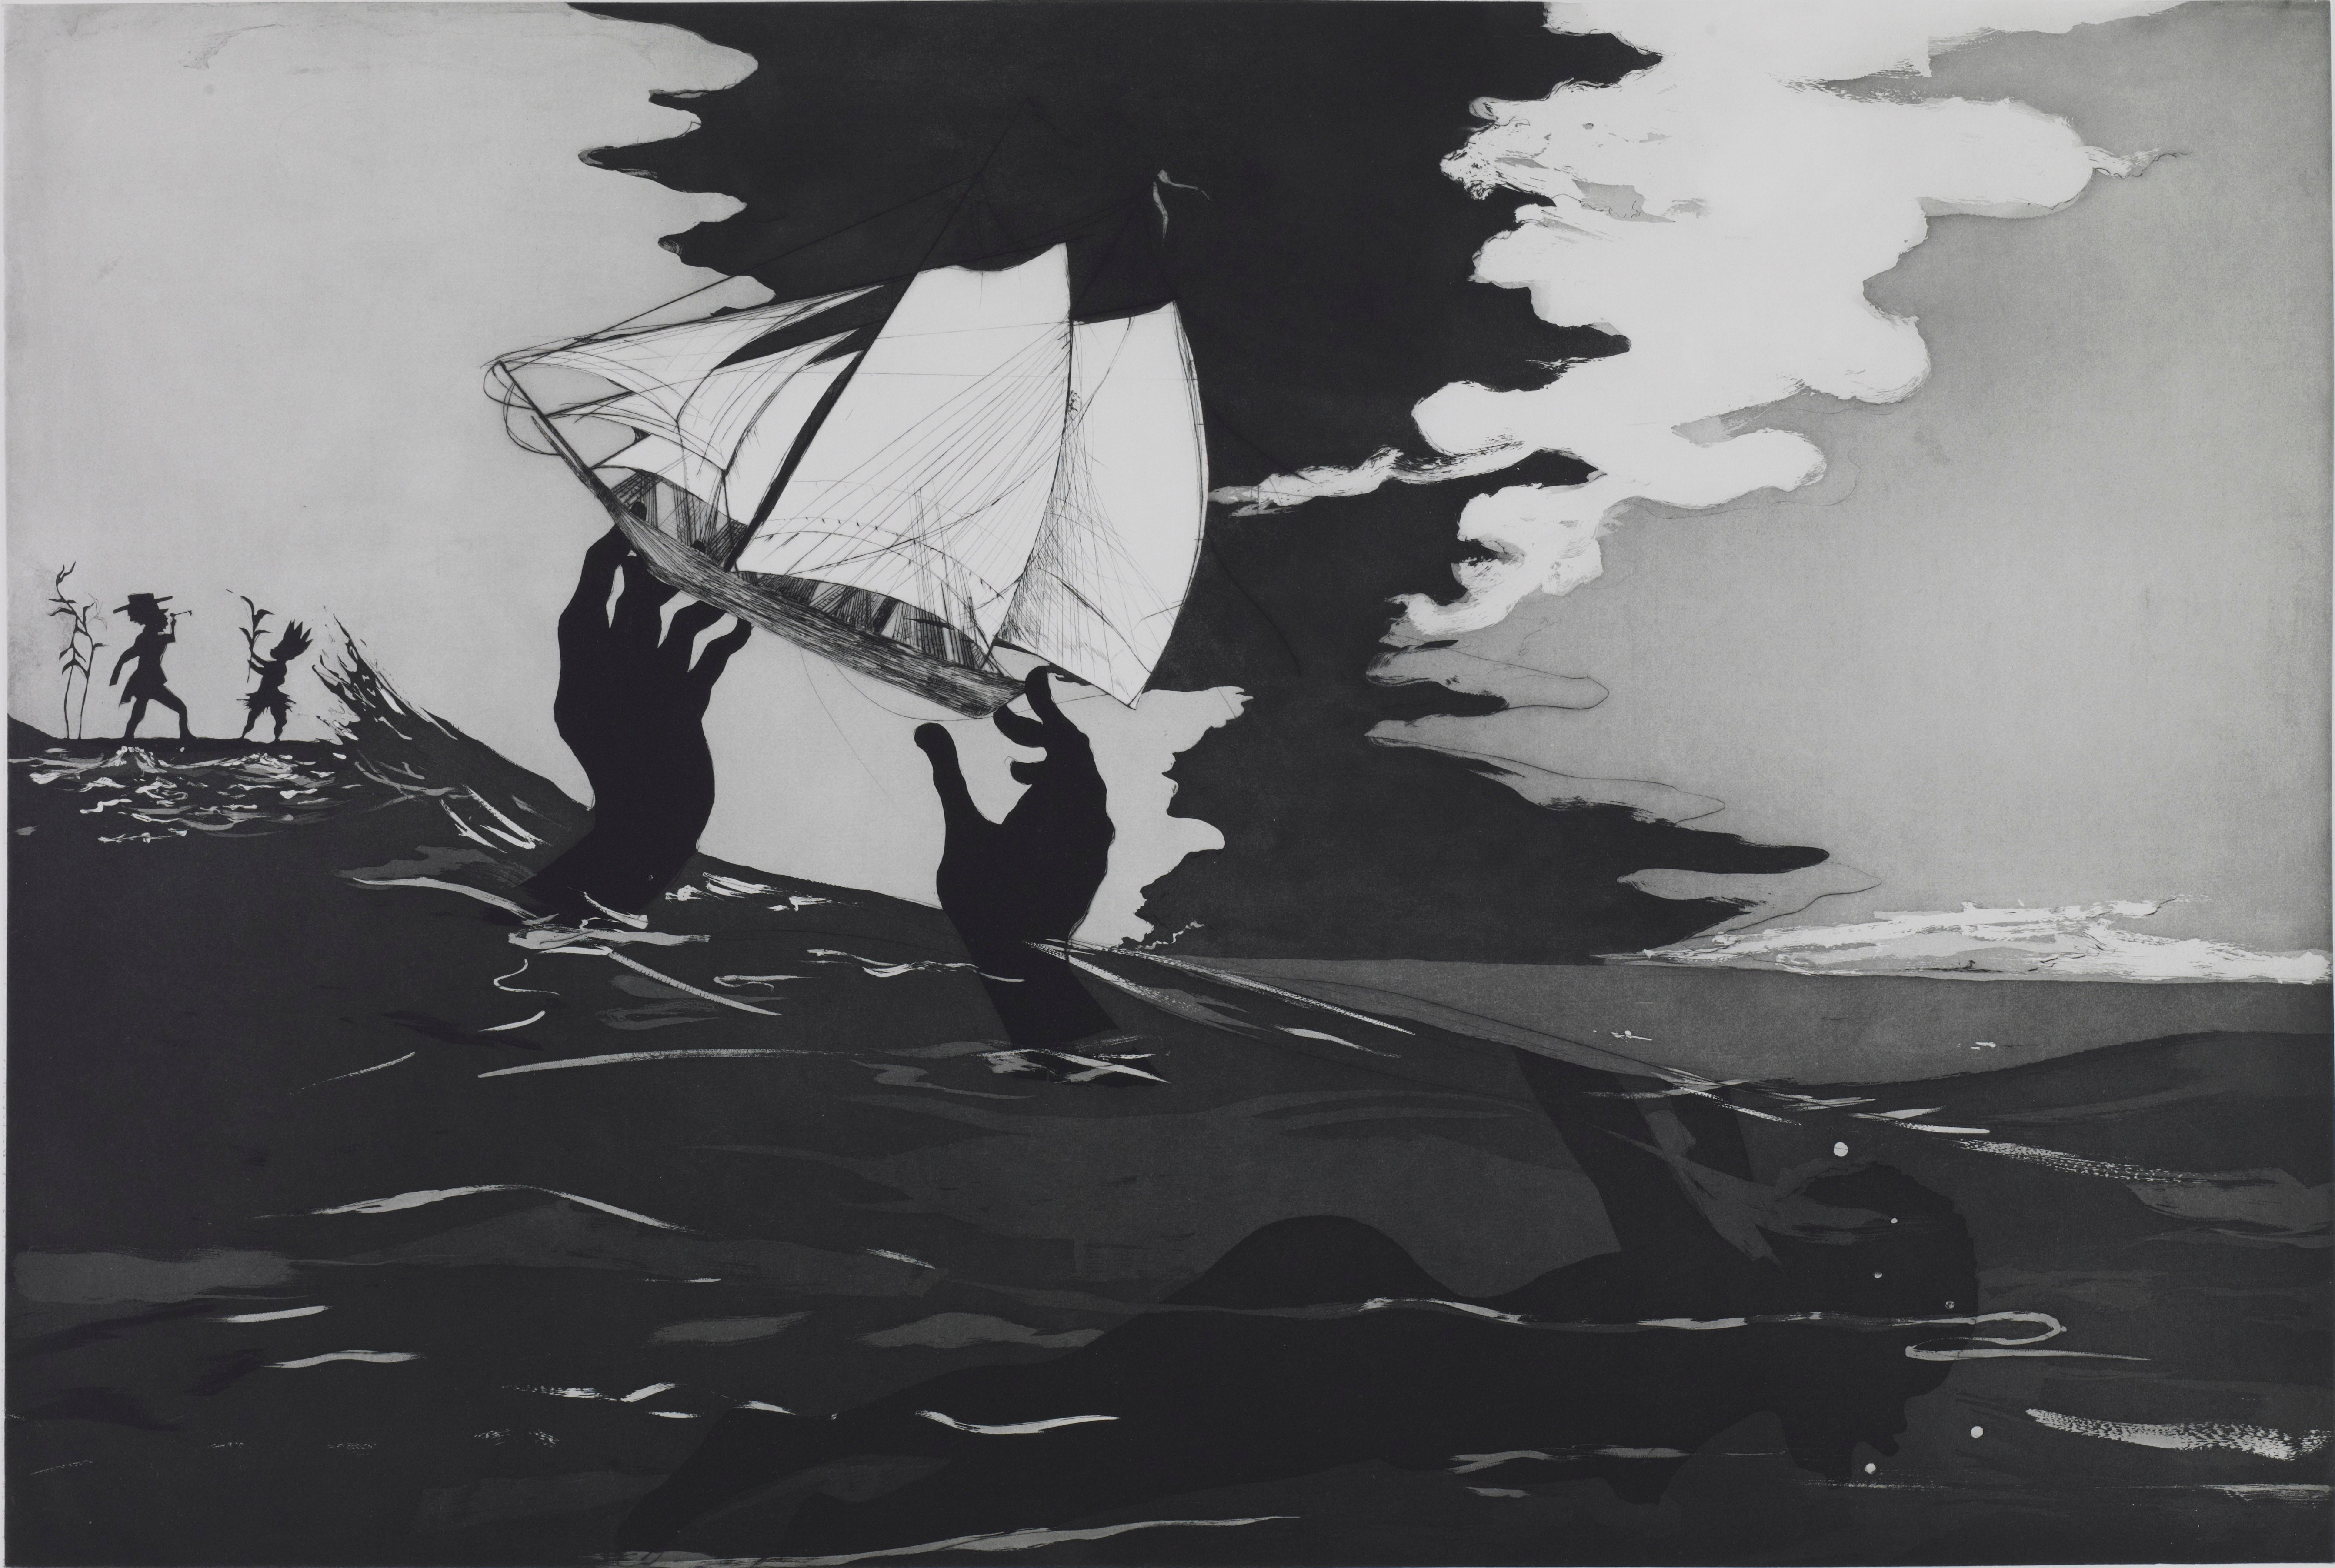 Pieces like Kara Walker’s ‘no world’ are contrasted by 18th-century romanticist seascapes